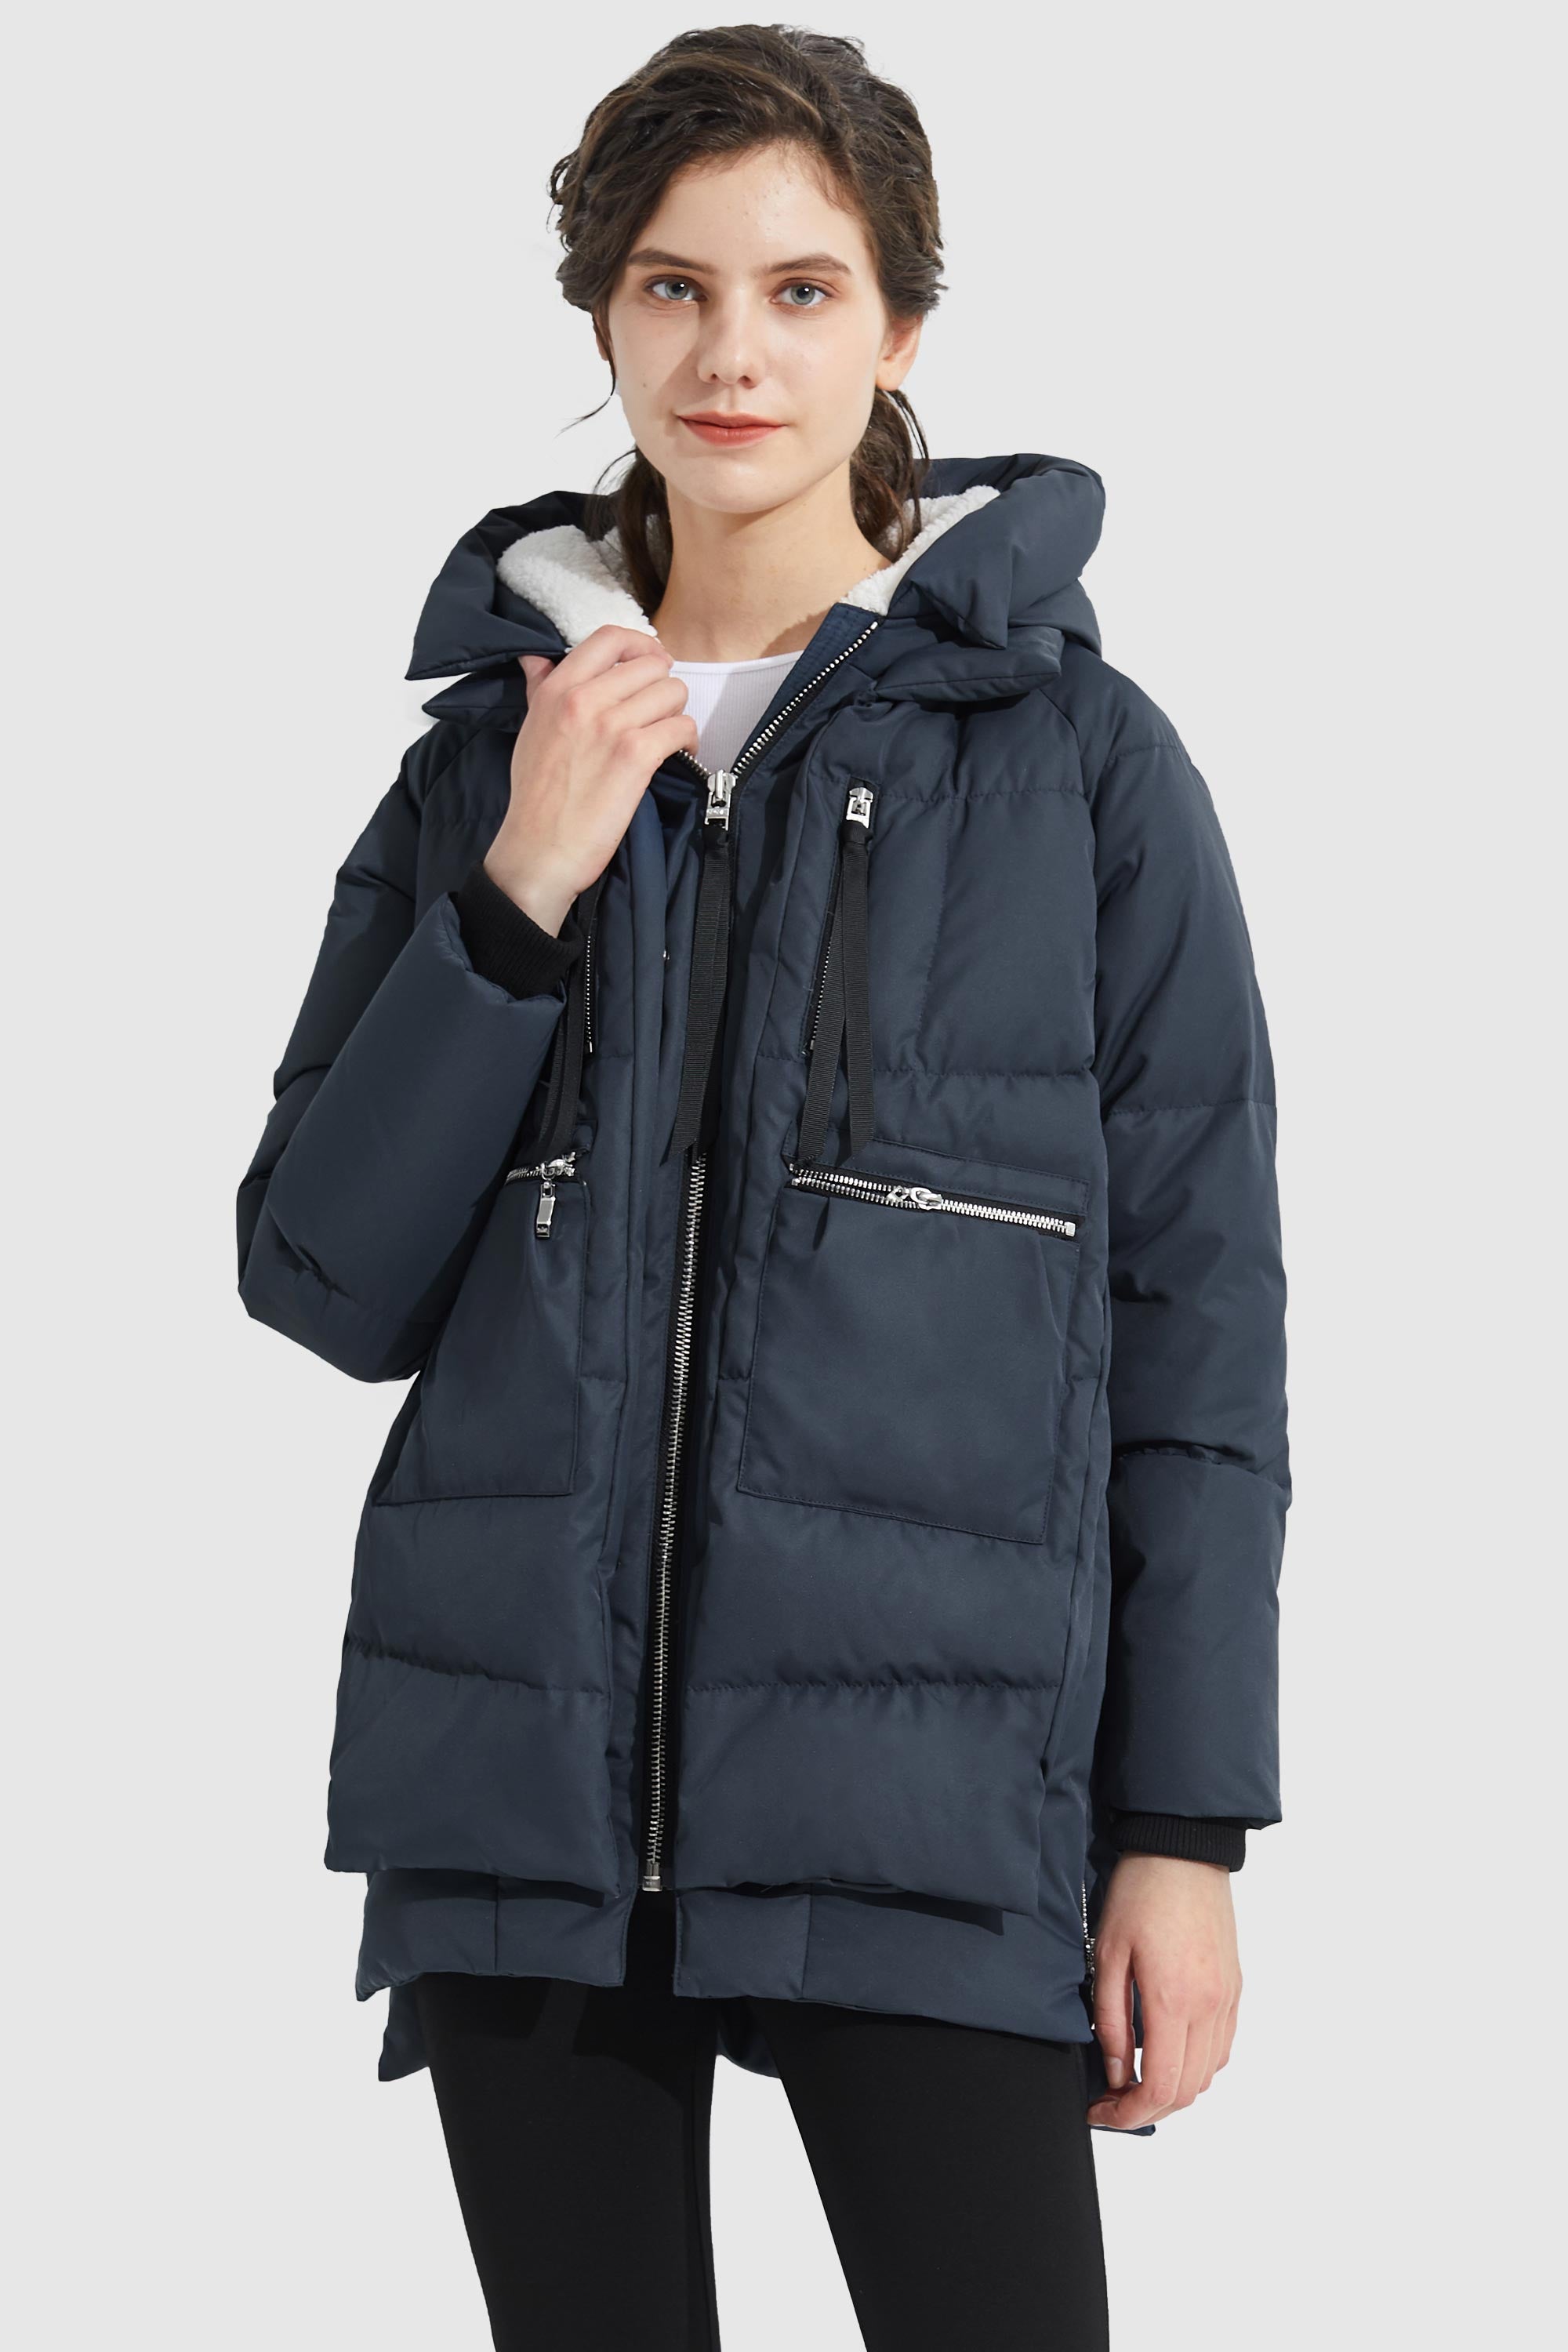 092 Universe Classics Women's Thickened Down Jacket